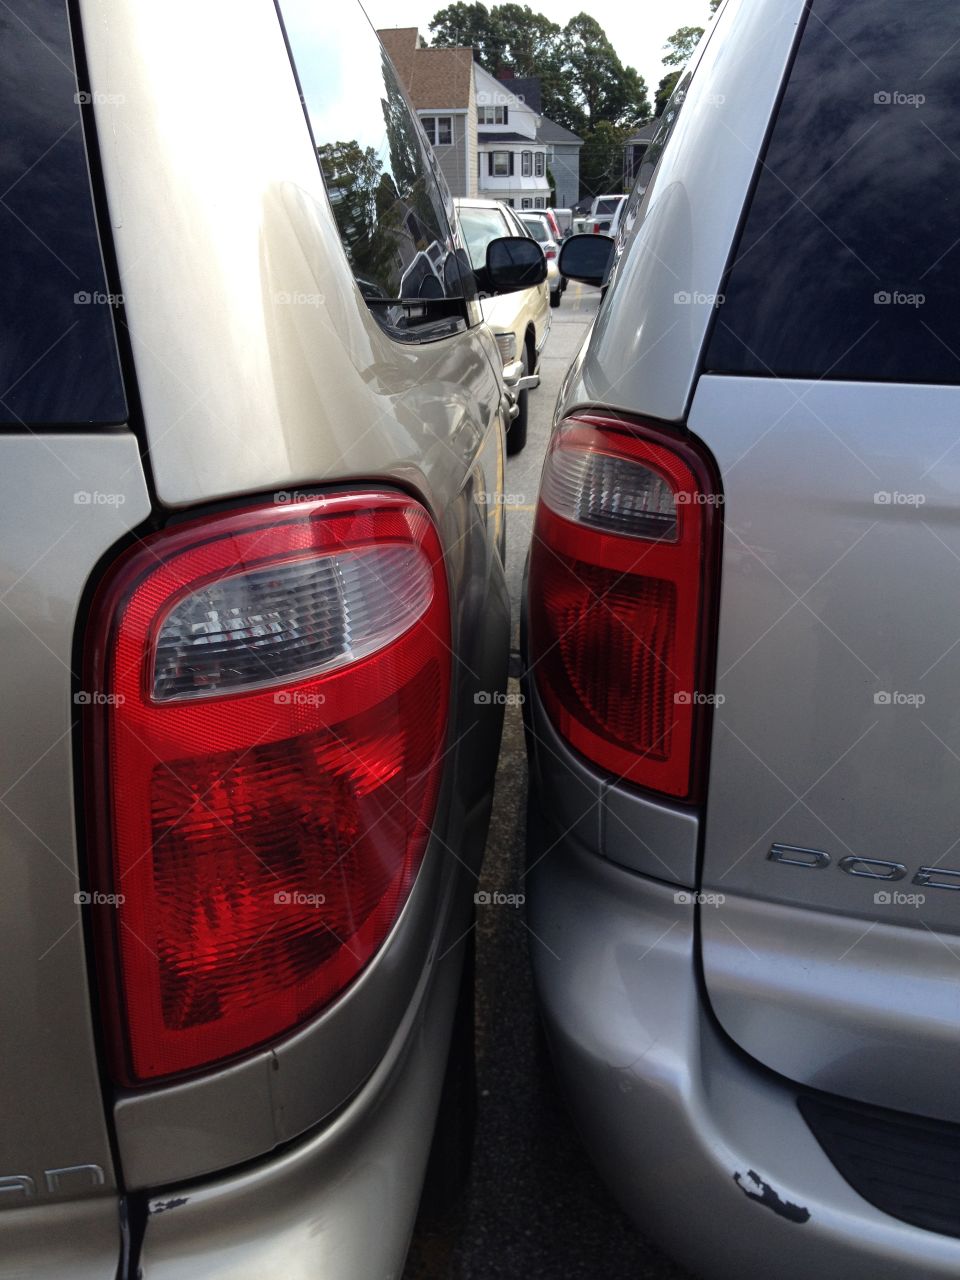 Cars parking way too close, scraped each!